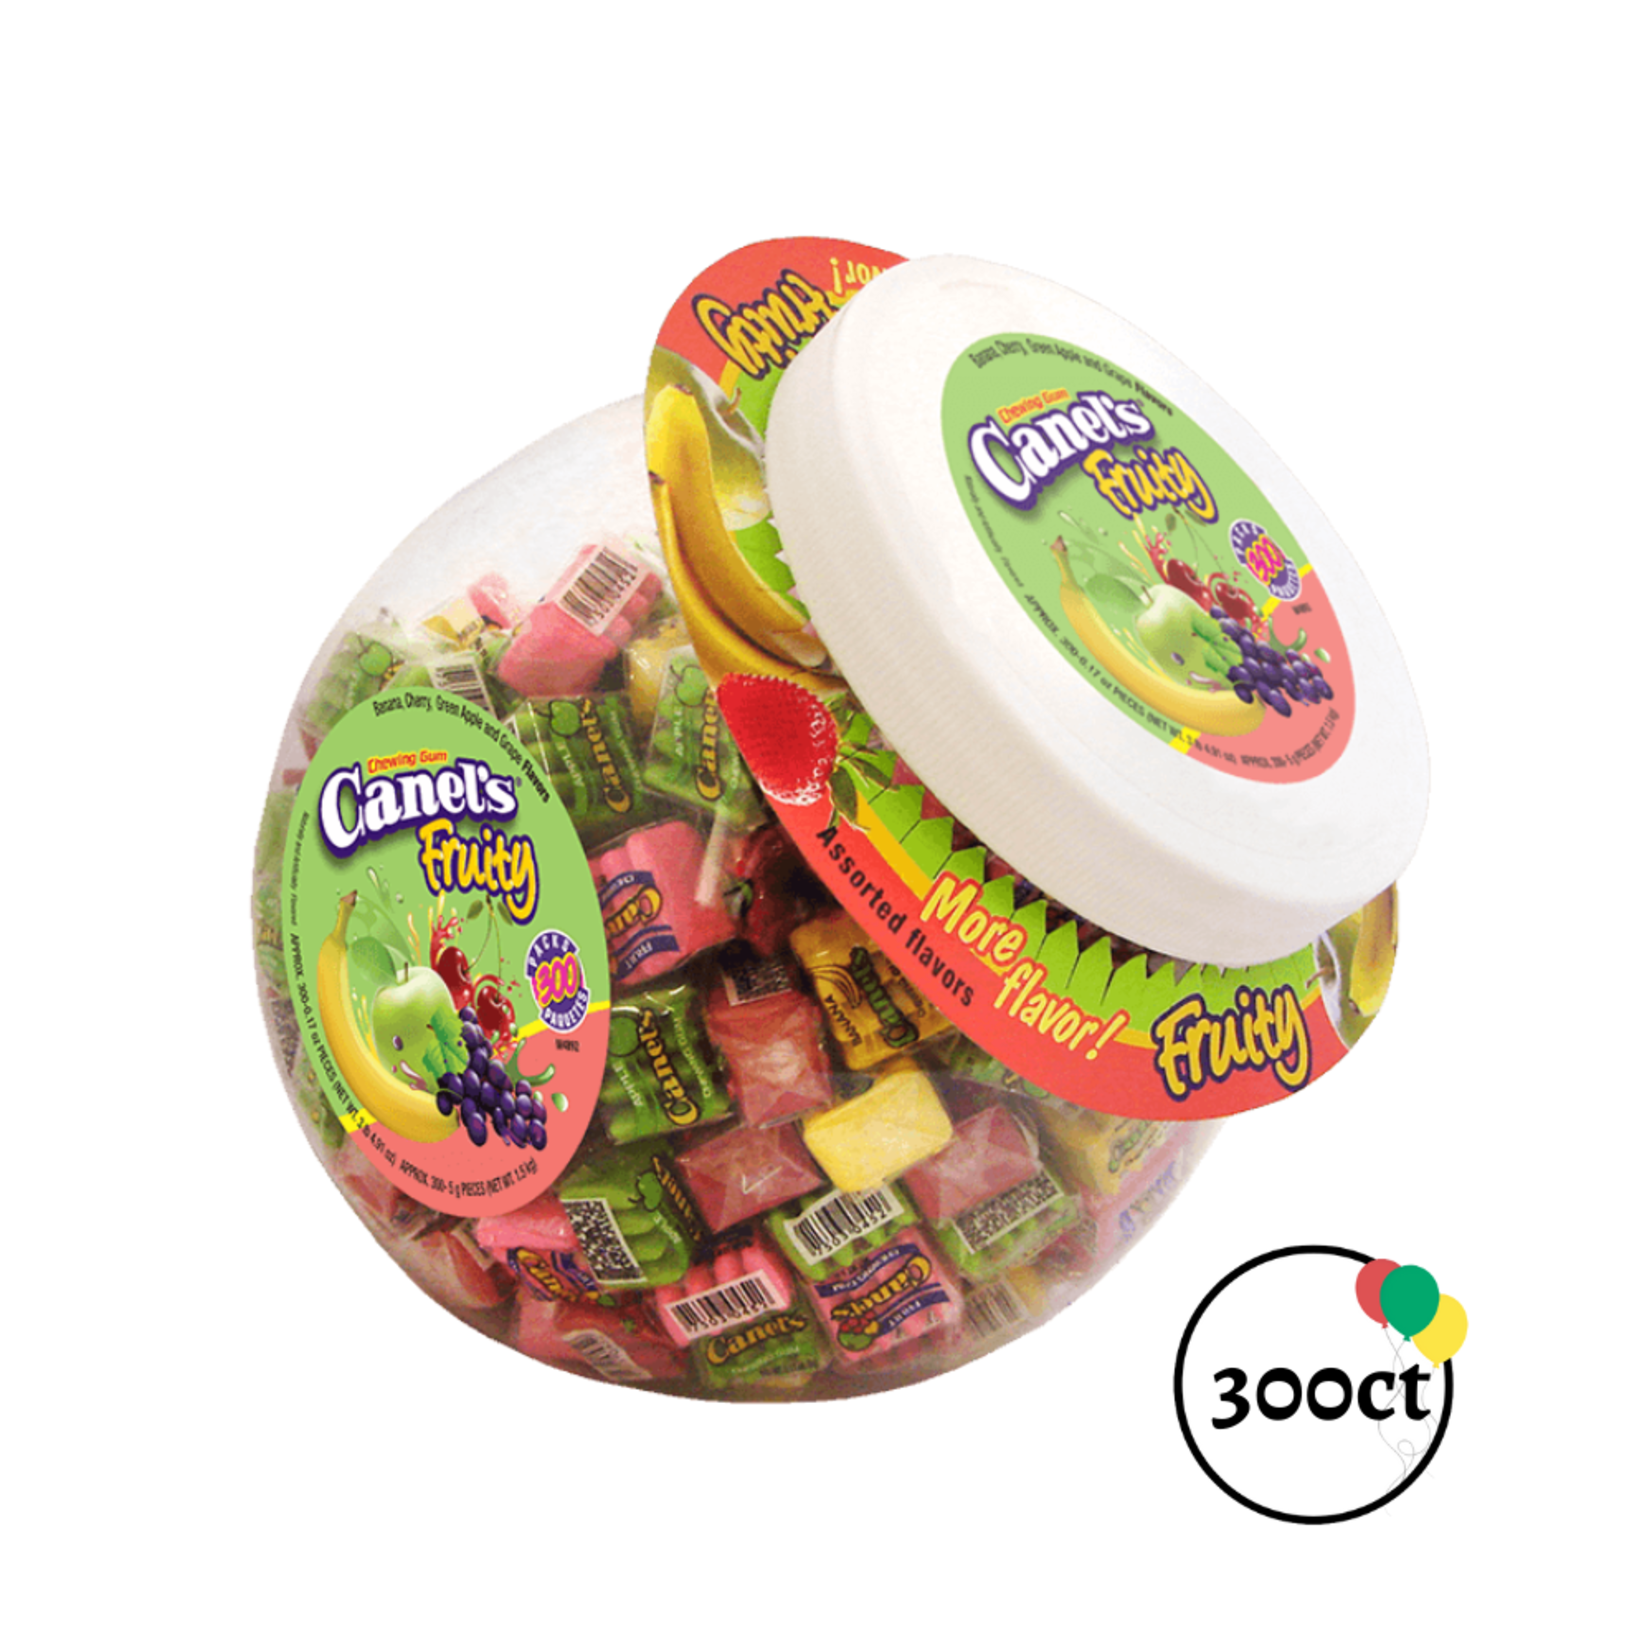 Canel's Canel's Fruity Gum 300ct